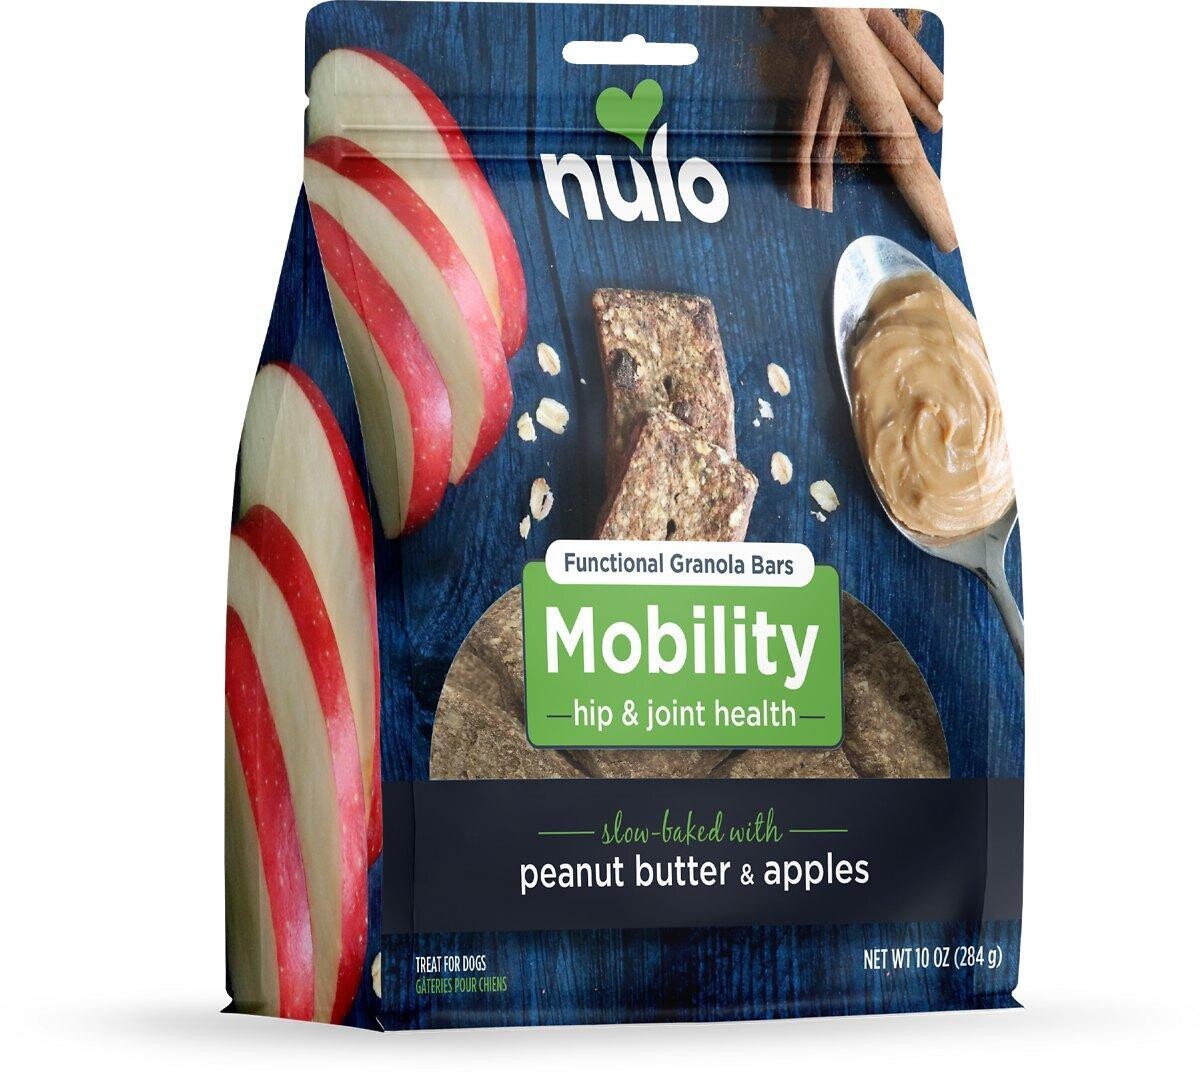 Nulo Functional Granola Bar Mobility Hip & Joint Health Dog Treats Peanut Butter & Apples 10 oz